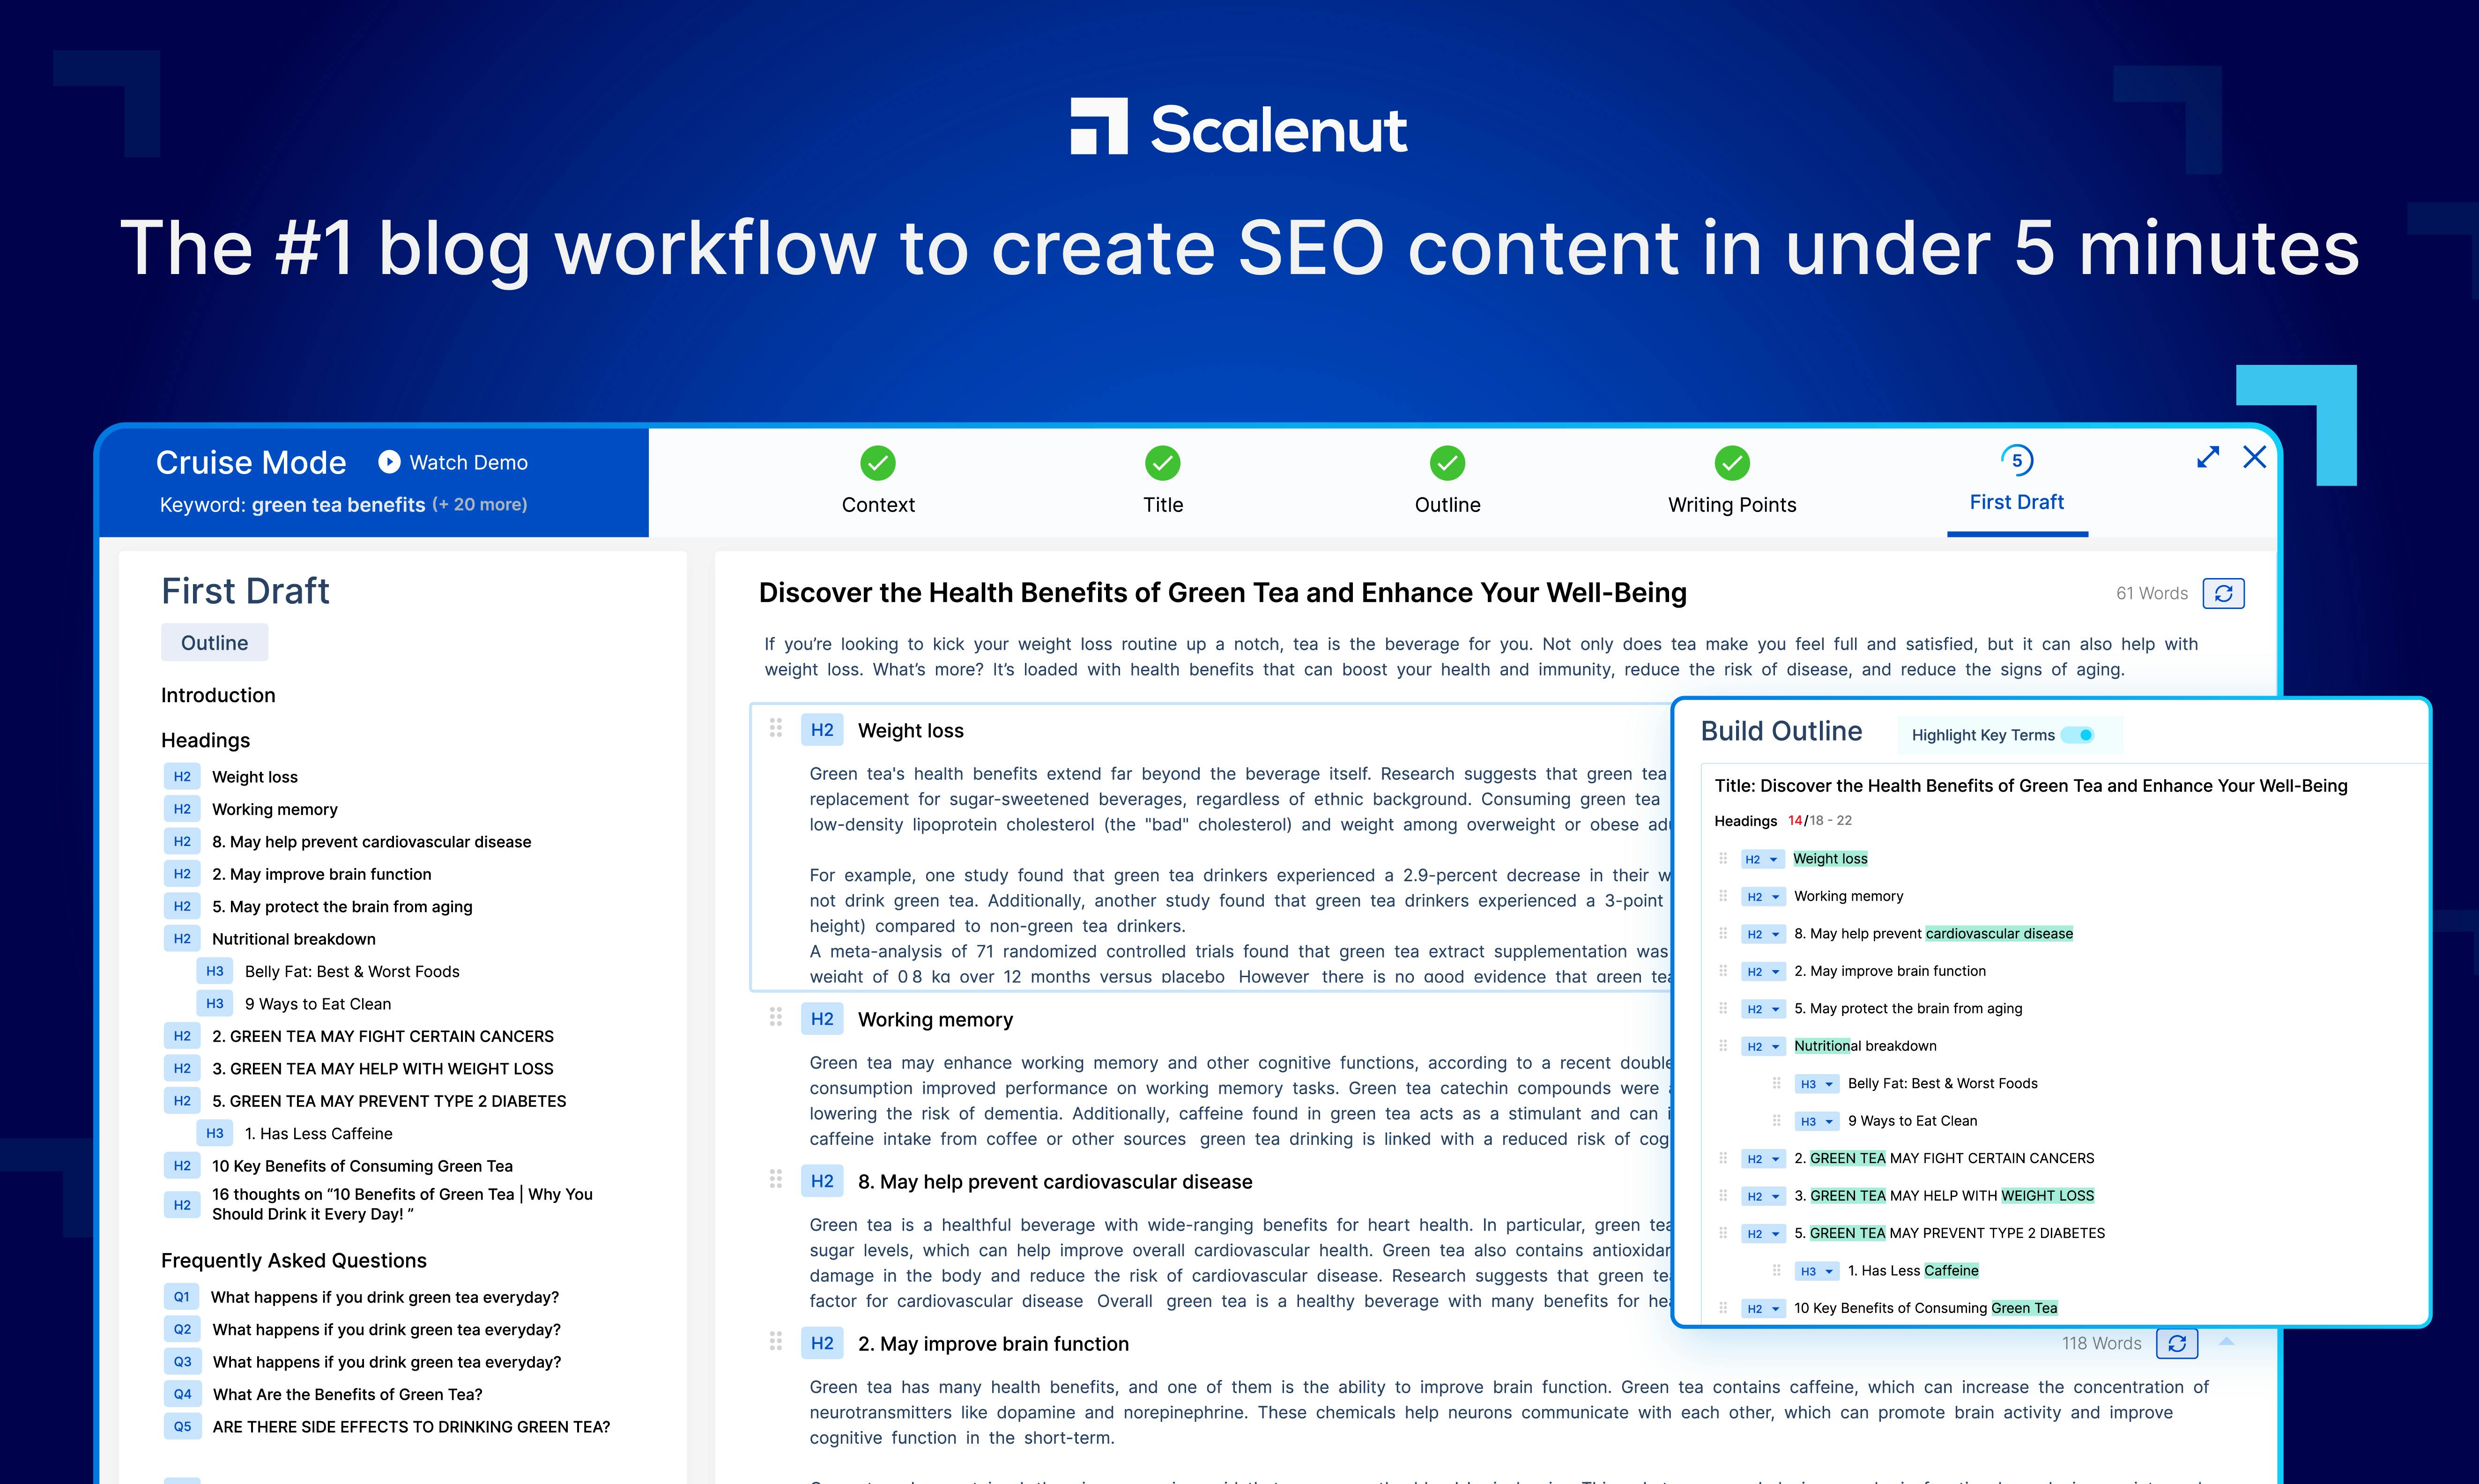 Driving traffic to your website through Scalenut